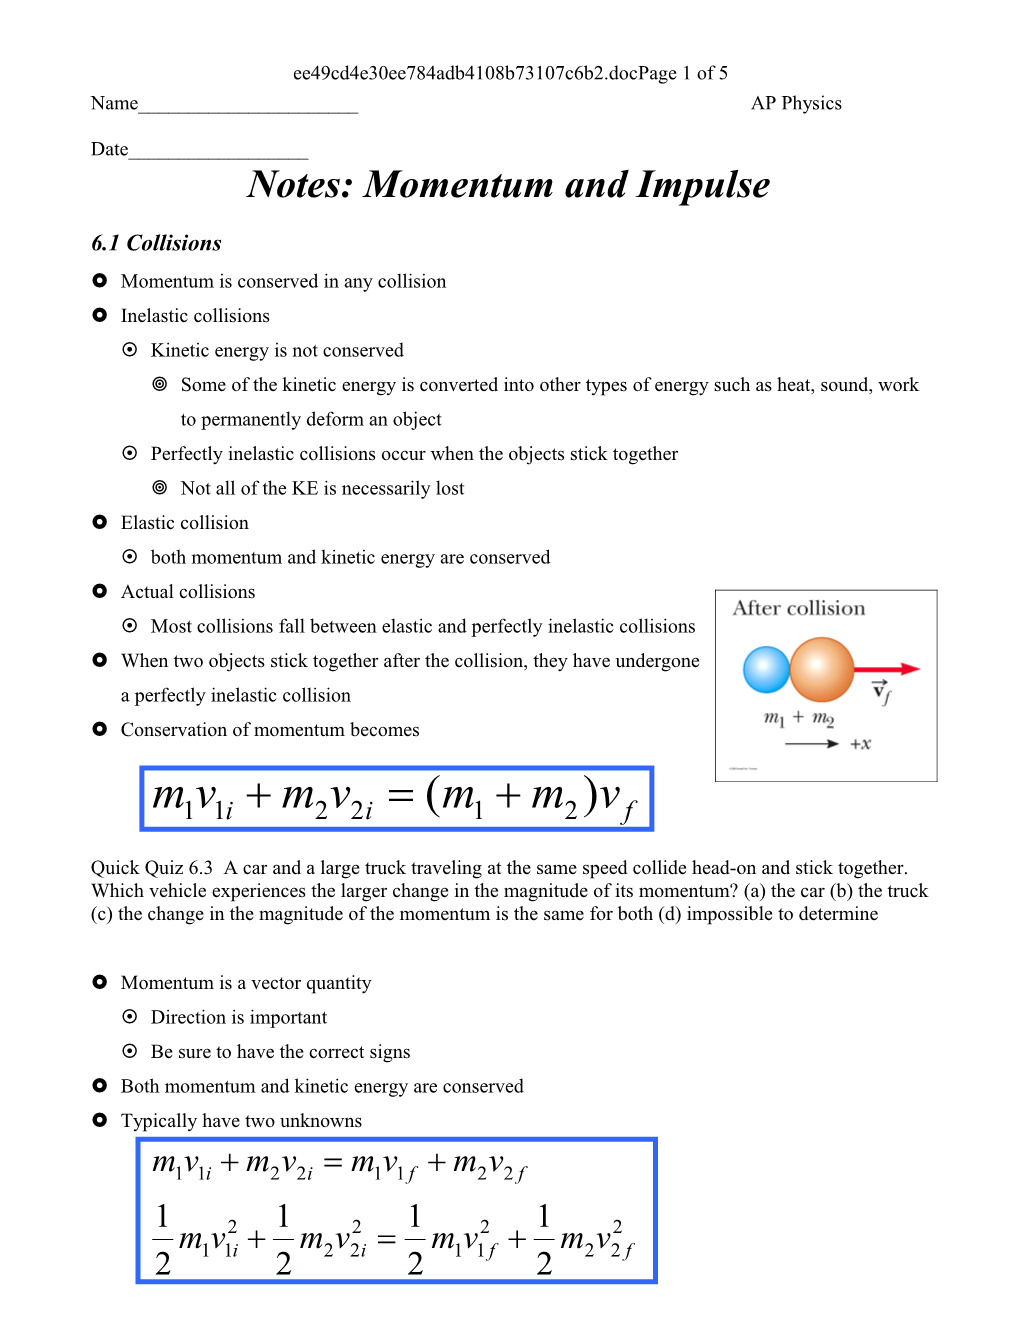 Notes: Momentum and Impulse